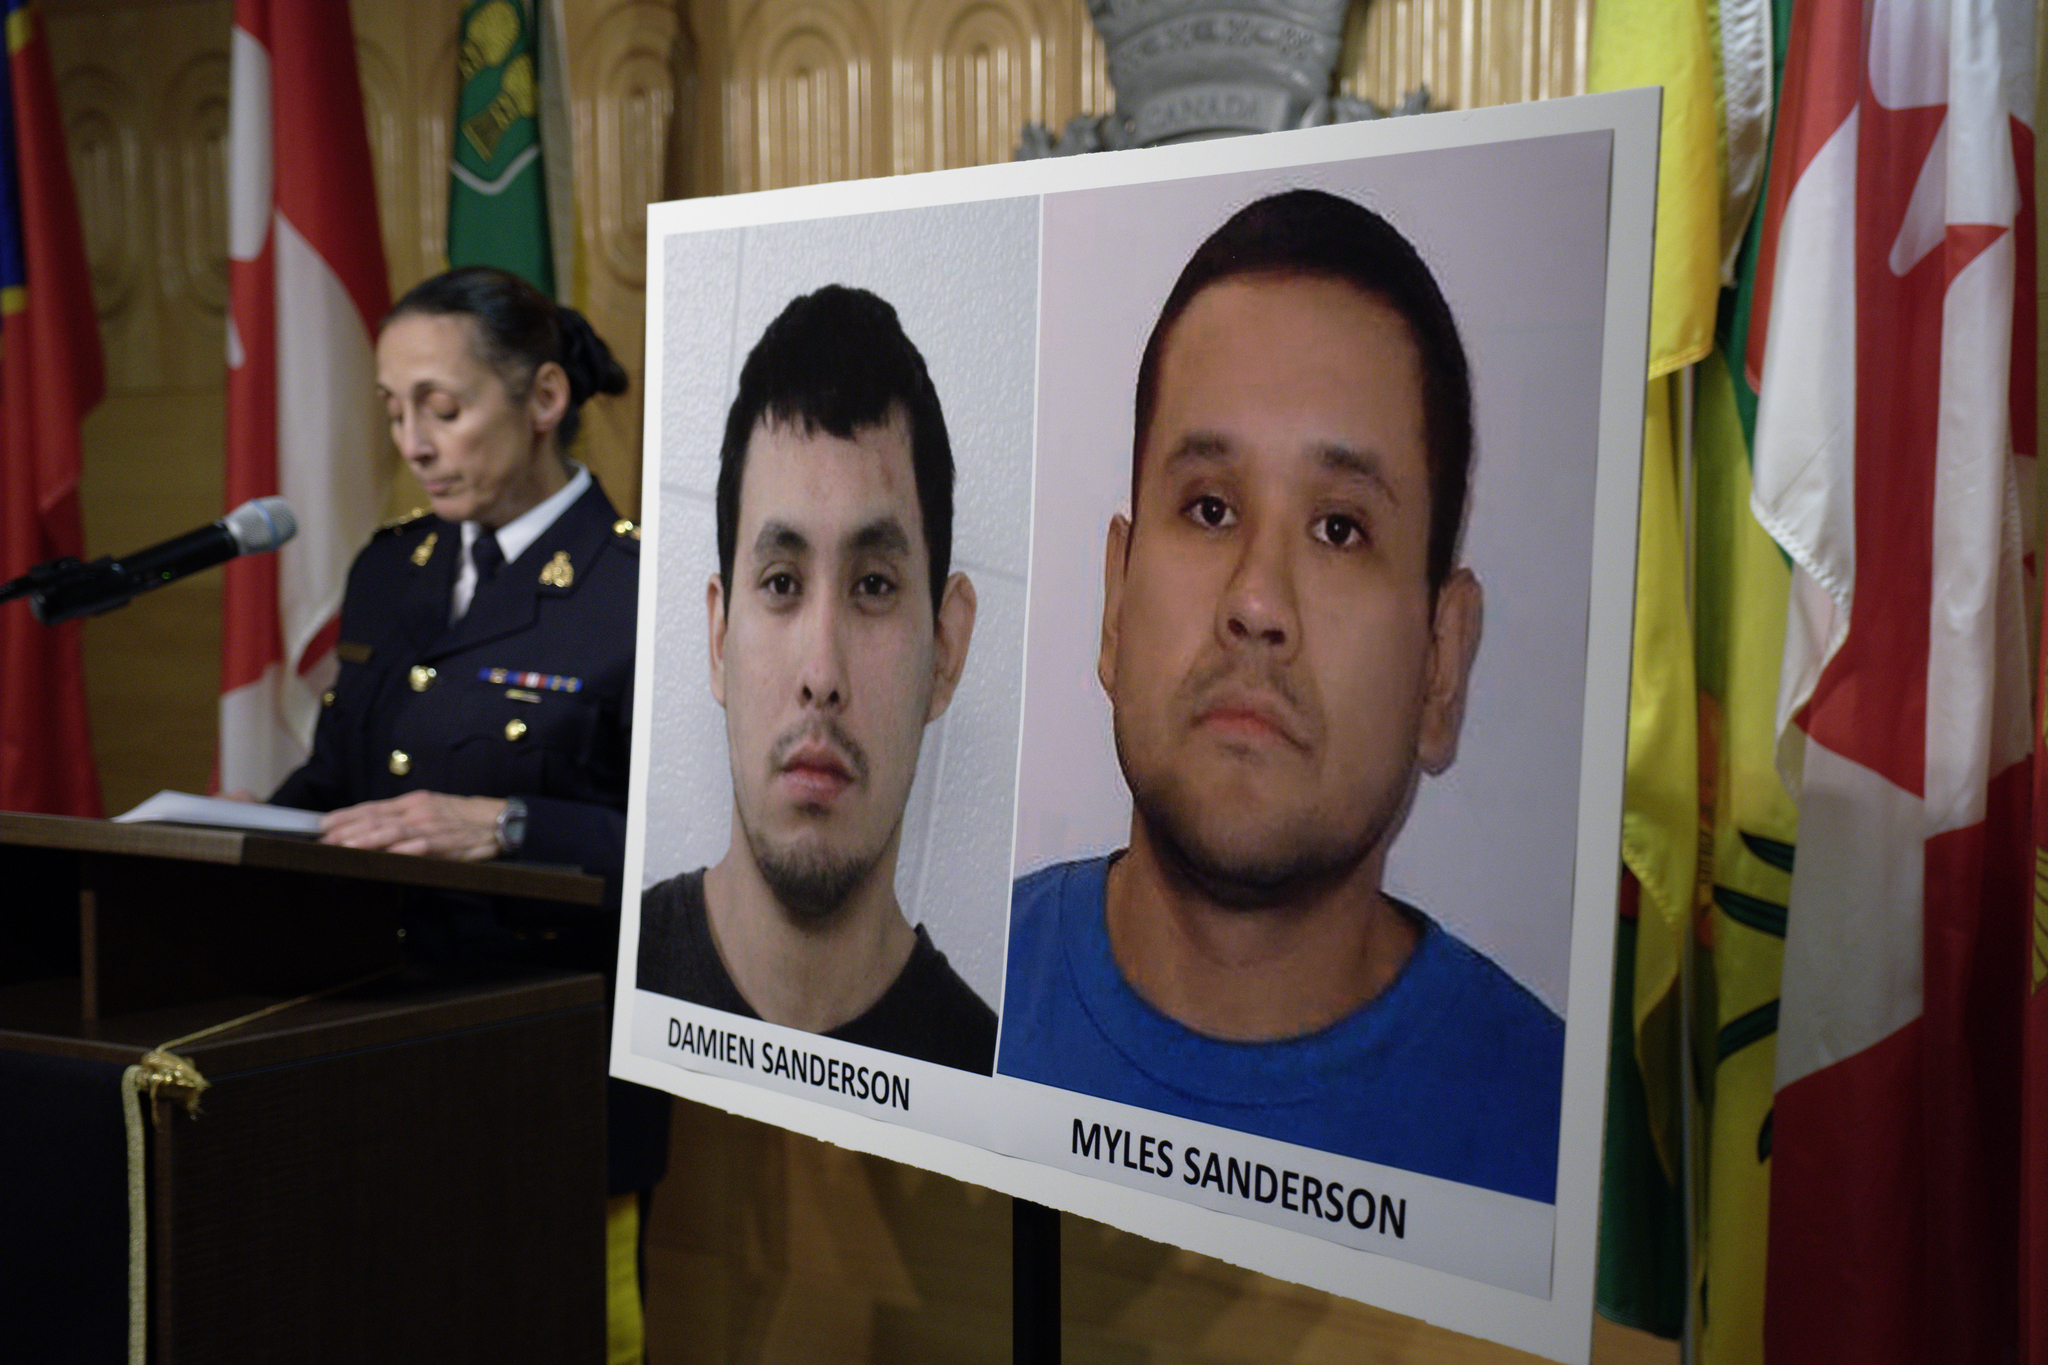 Assistant Commissioner Rhonda Blackmore speaks next to images of Damien Sanderson and Myles Sanderson during a press conference in Saskatchewan. AP